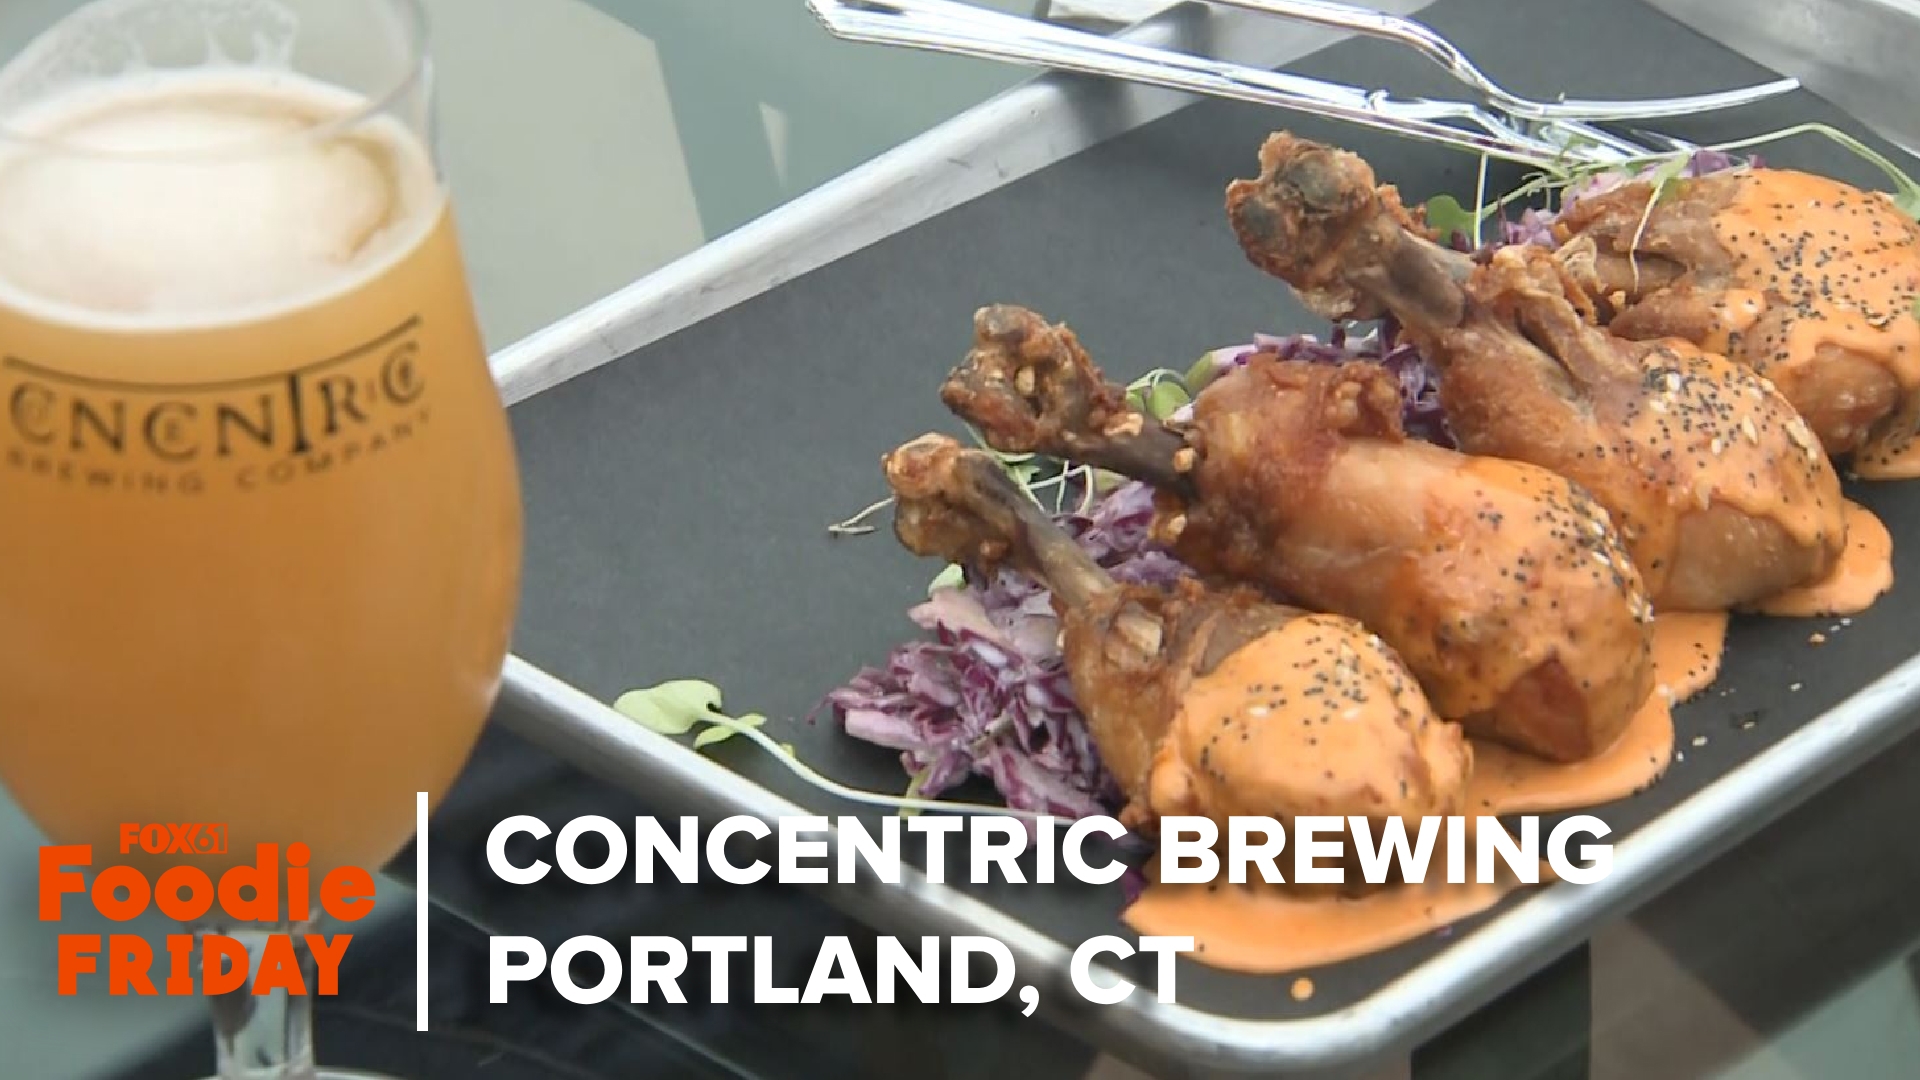 This brewery sits right next to the Arrigoni Bridge in Portland. FOX61's Rachel Piscitelli visits for Foodie Friday.